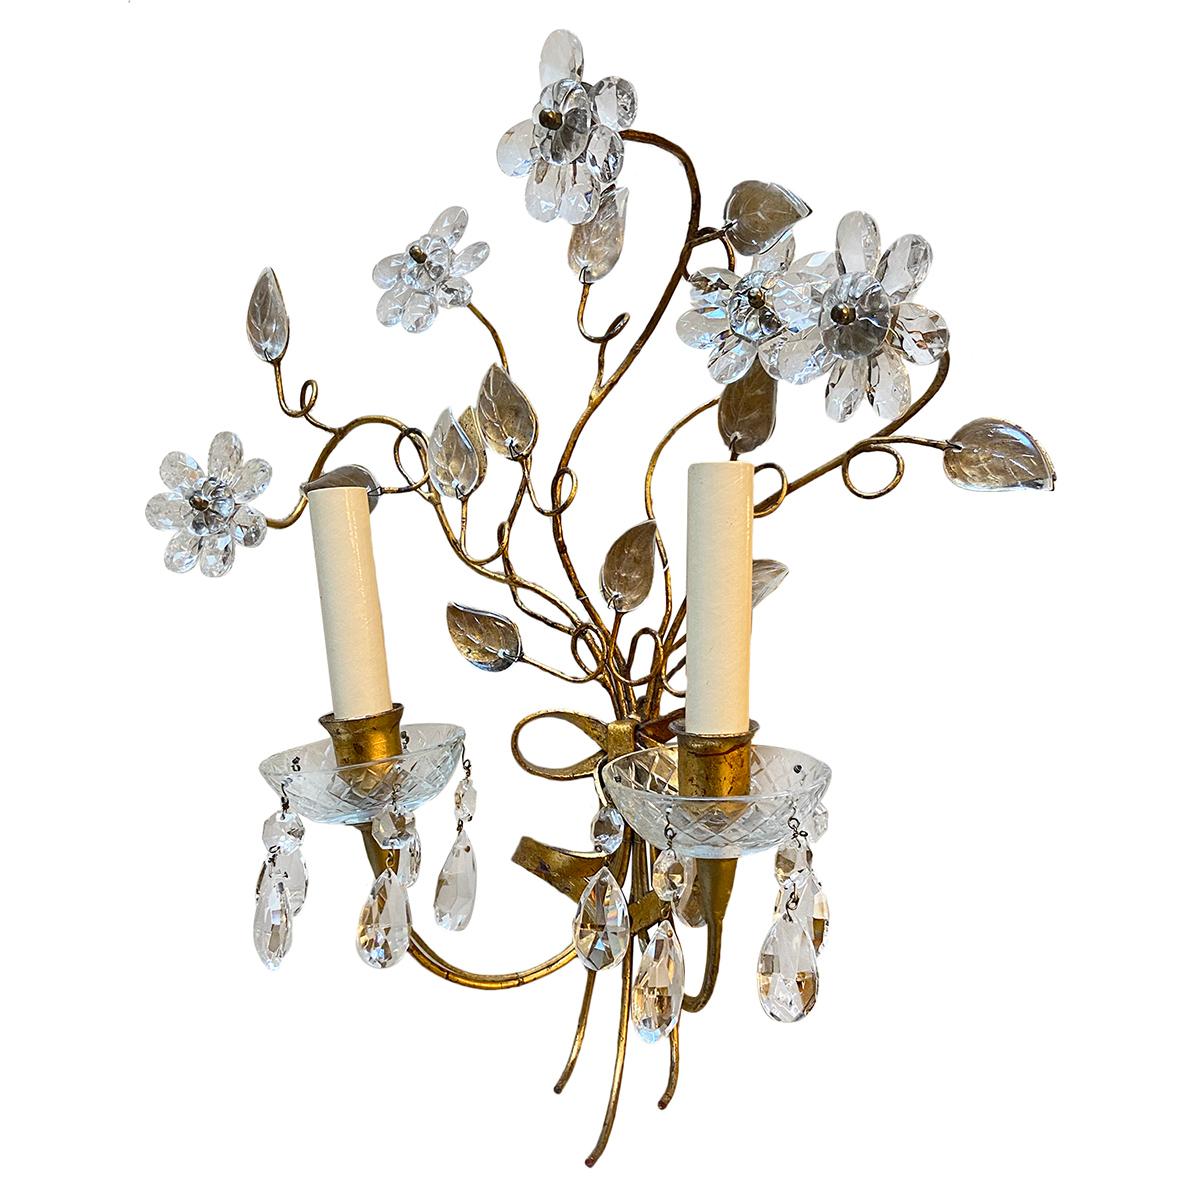 Set of four French circa 1940's gilt metal sconces shaped as a bouquet of crystal flowers and pendants. Sold per pair.

Measurements:
Height: 18